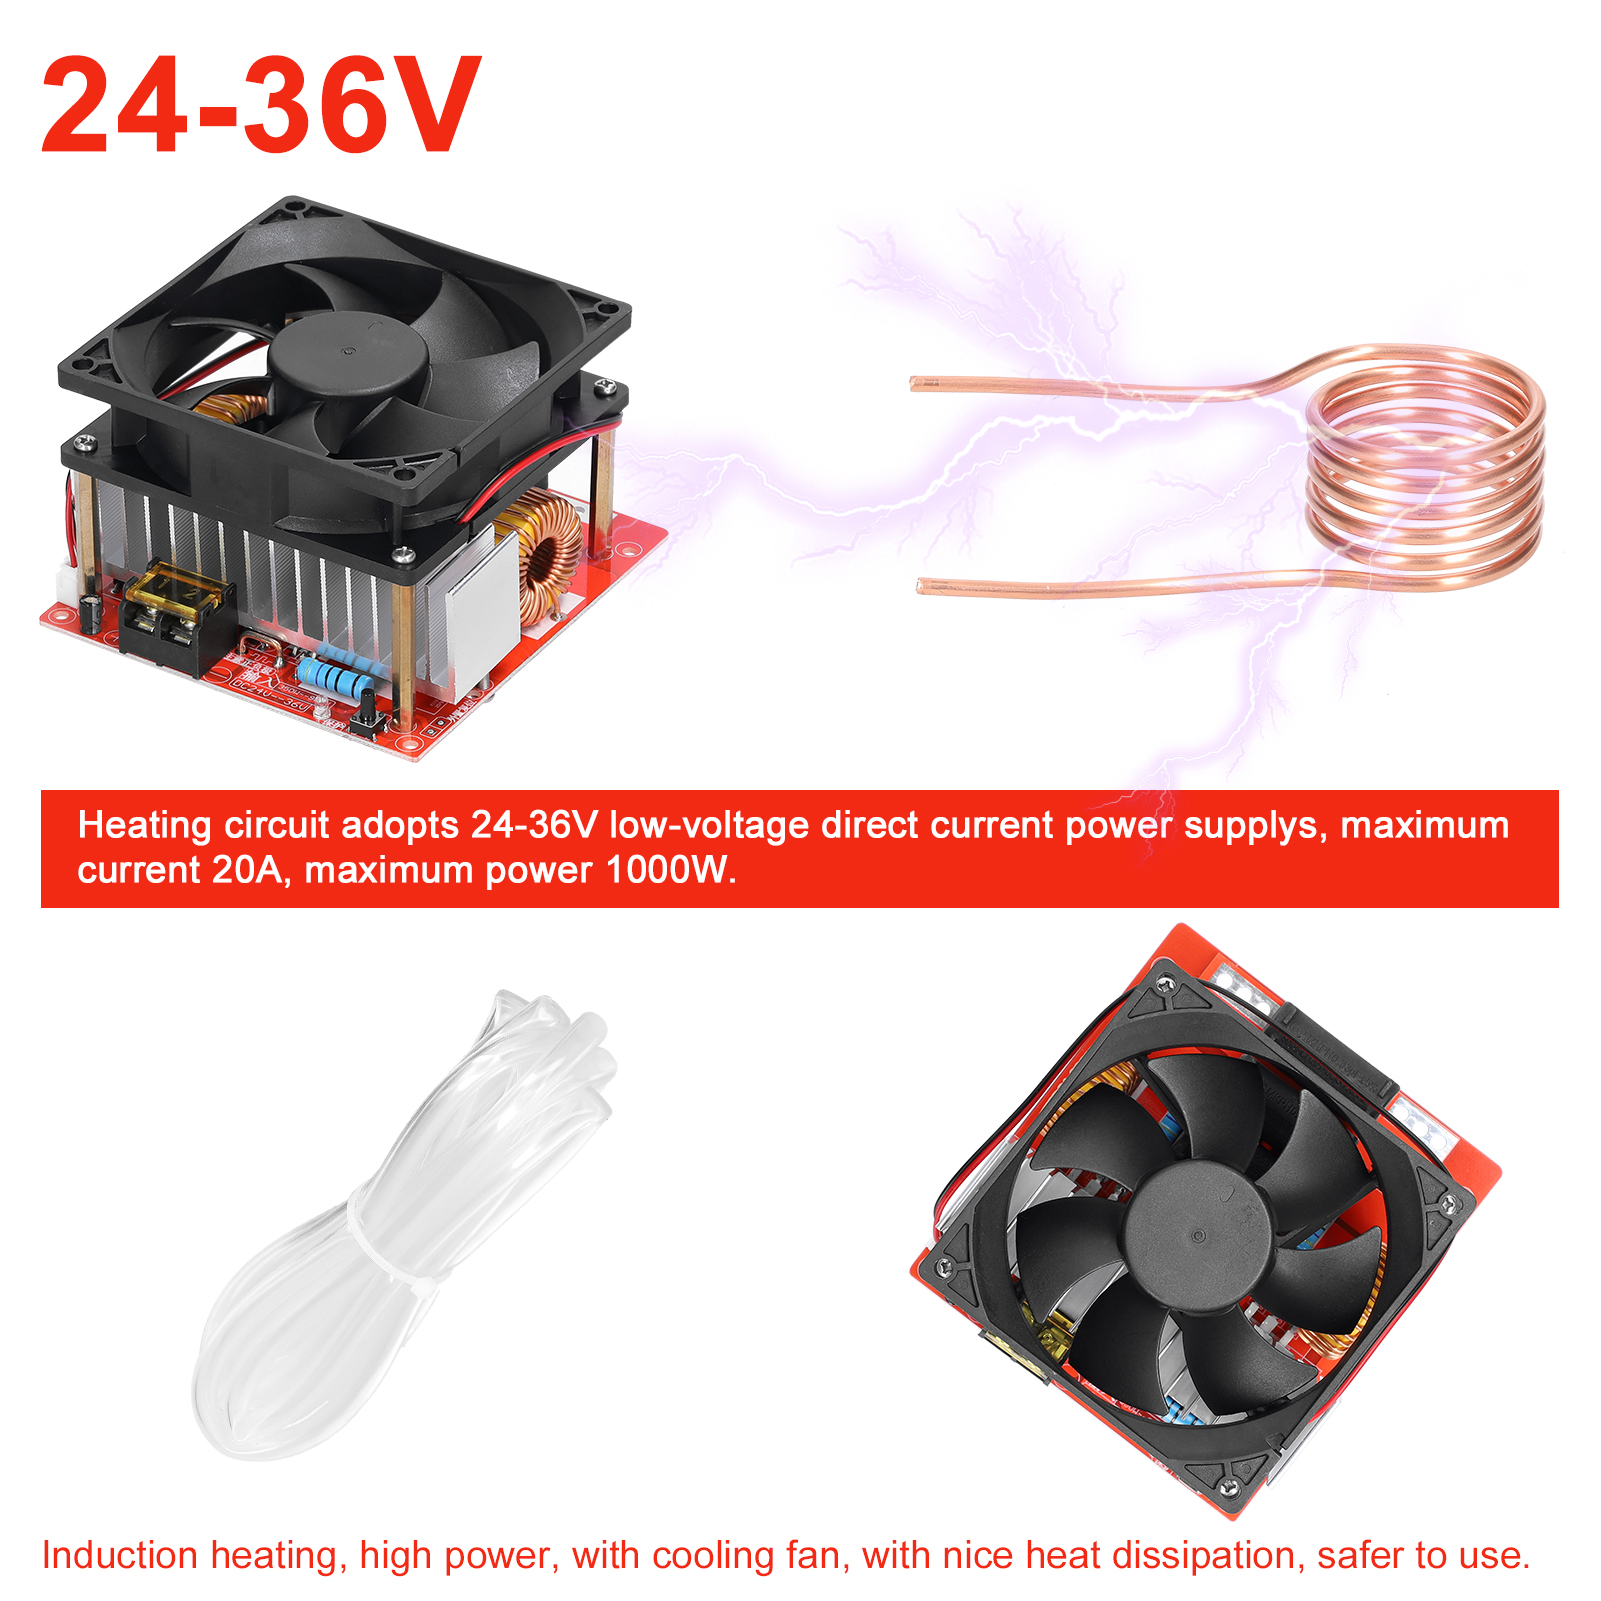 Tomshoo ZVS Induction Heating Board Module DIY Small Parts Hardening and Annealing Copper Tube Included - image 5 of 7